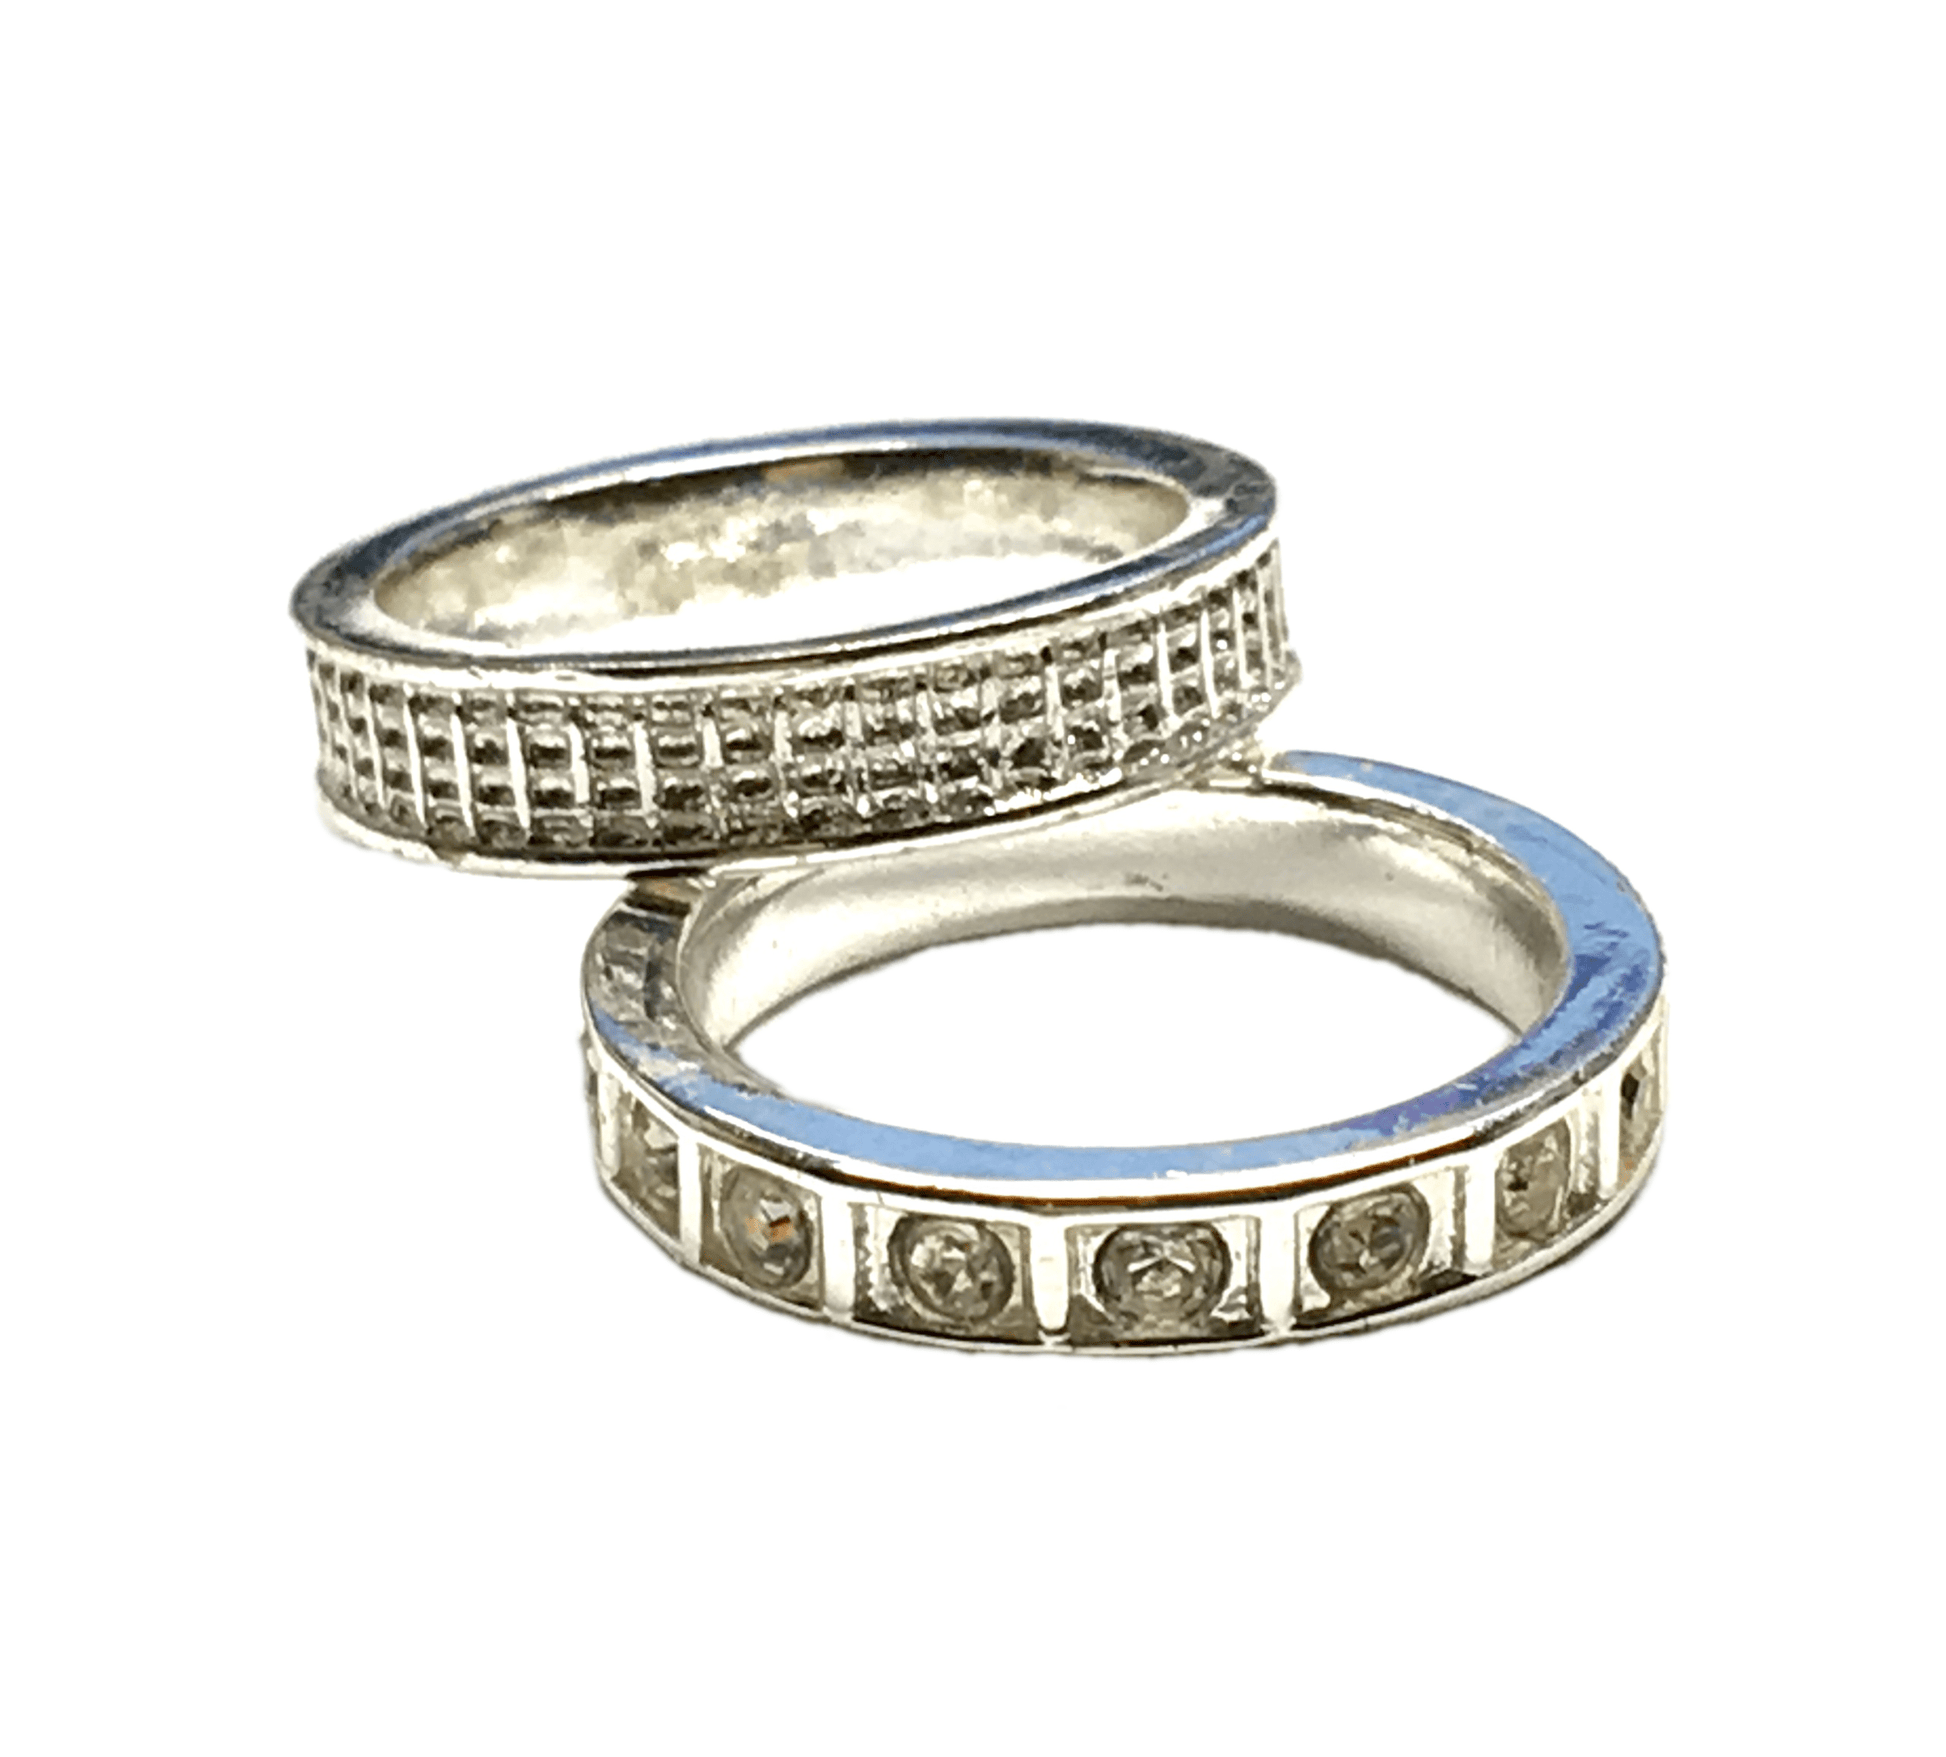 Ring - Bundle of 2 Silvery Shimmery Rhinestone Pattern Bands - Silver Stacking Ring